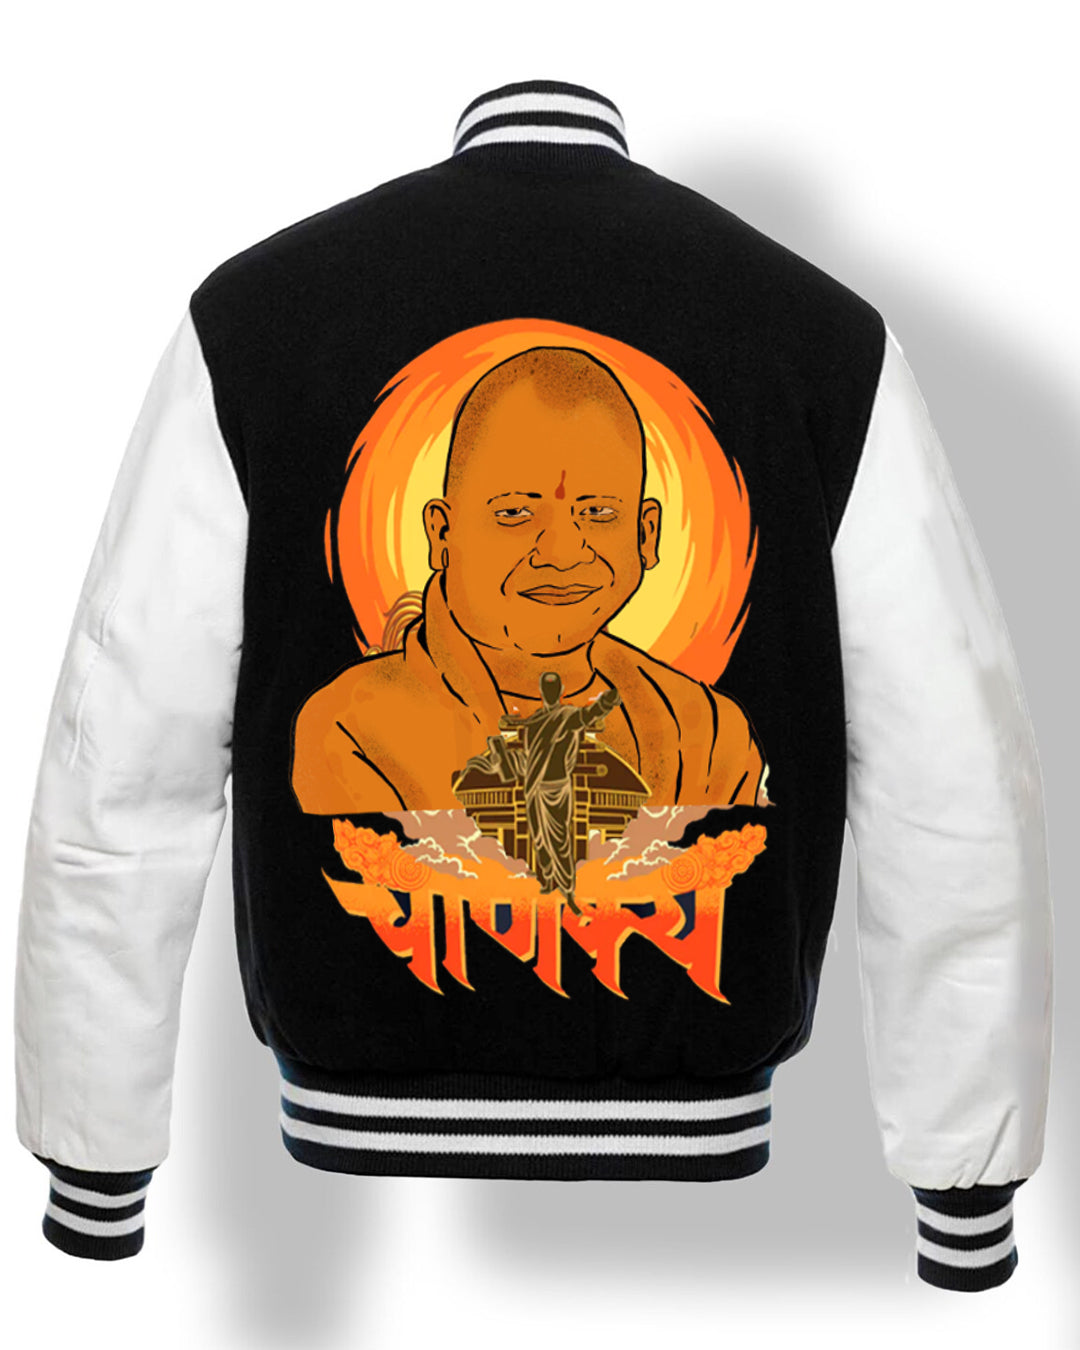 Chanakya-Inspired Men's Oversized Varsity Jacket with Unique Flair